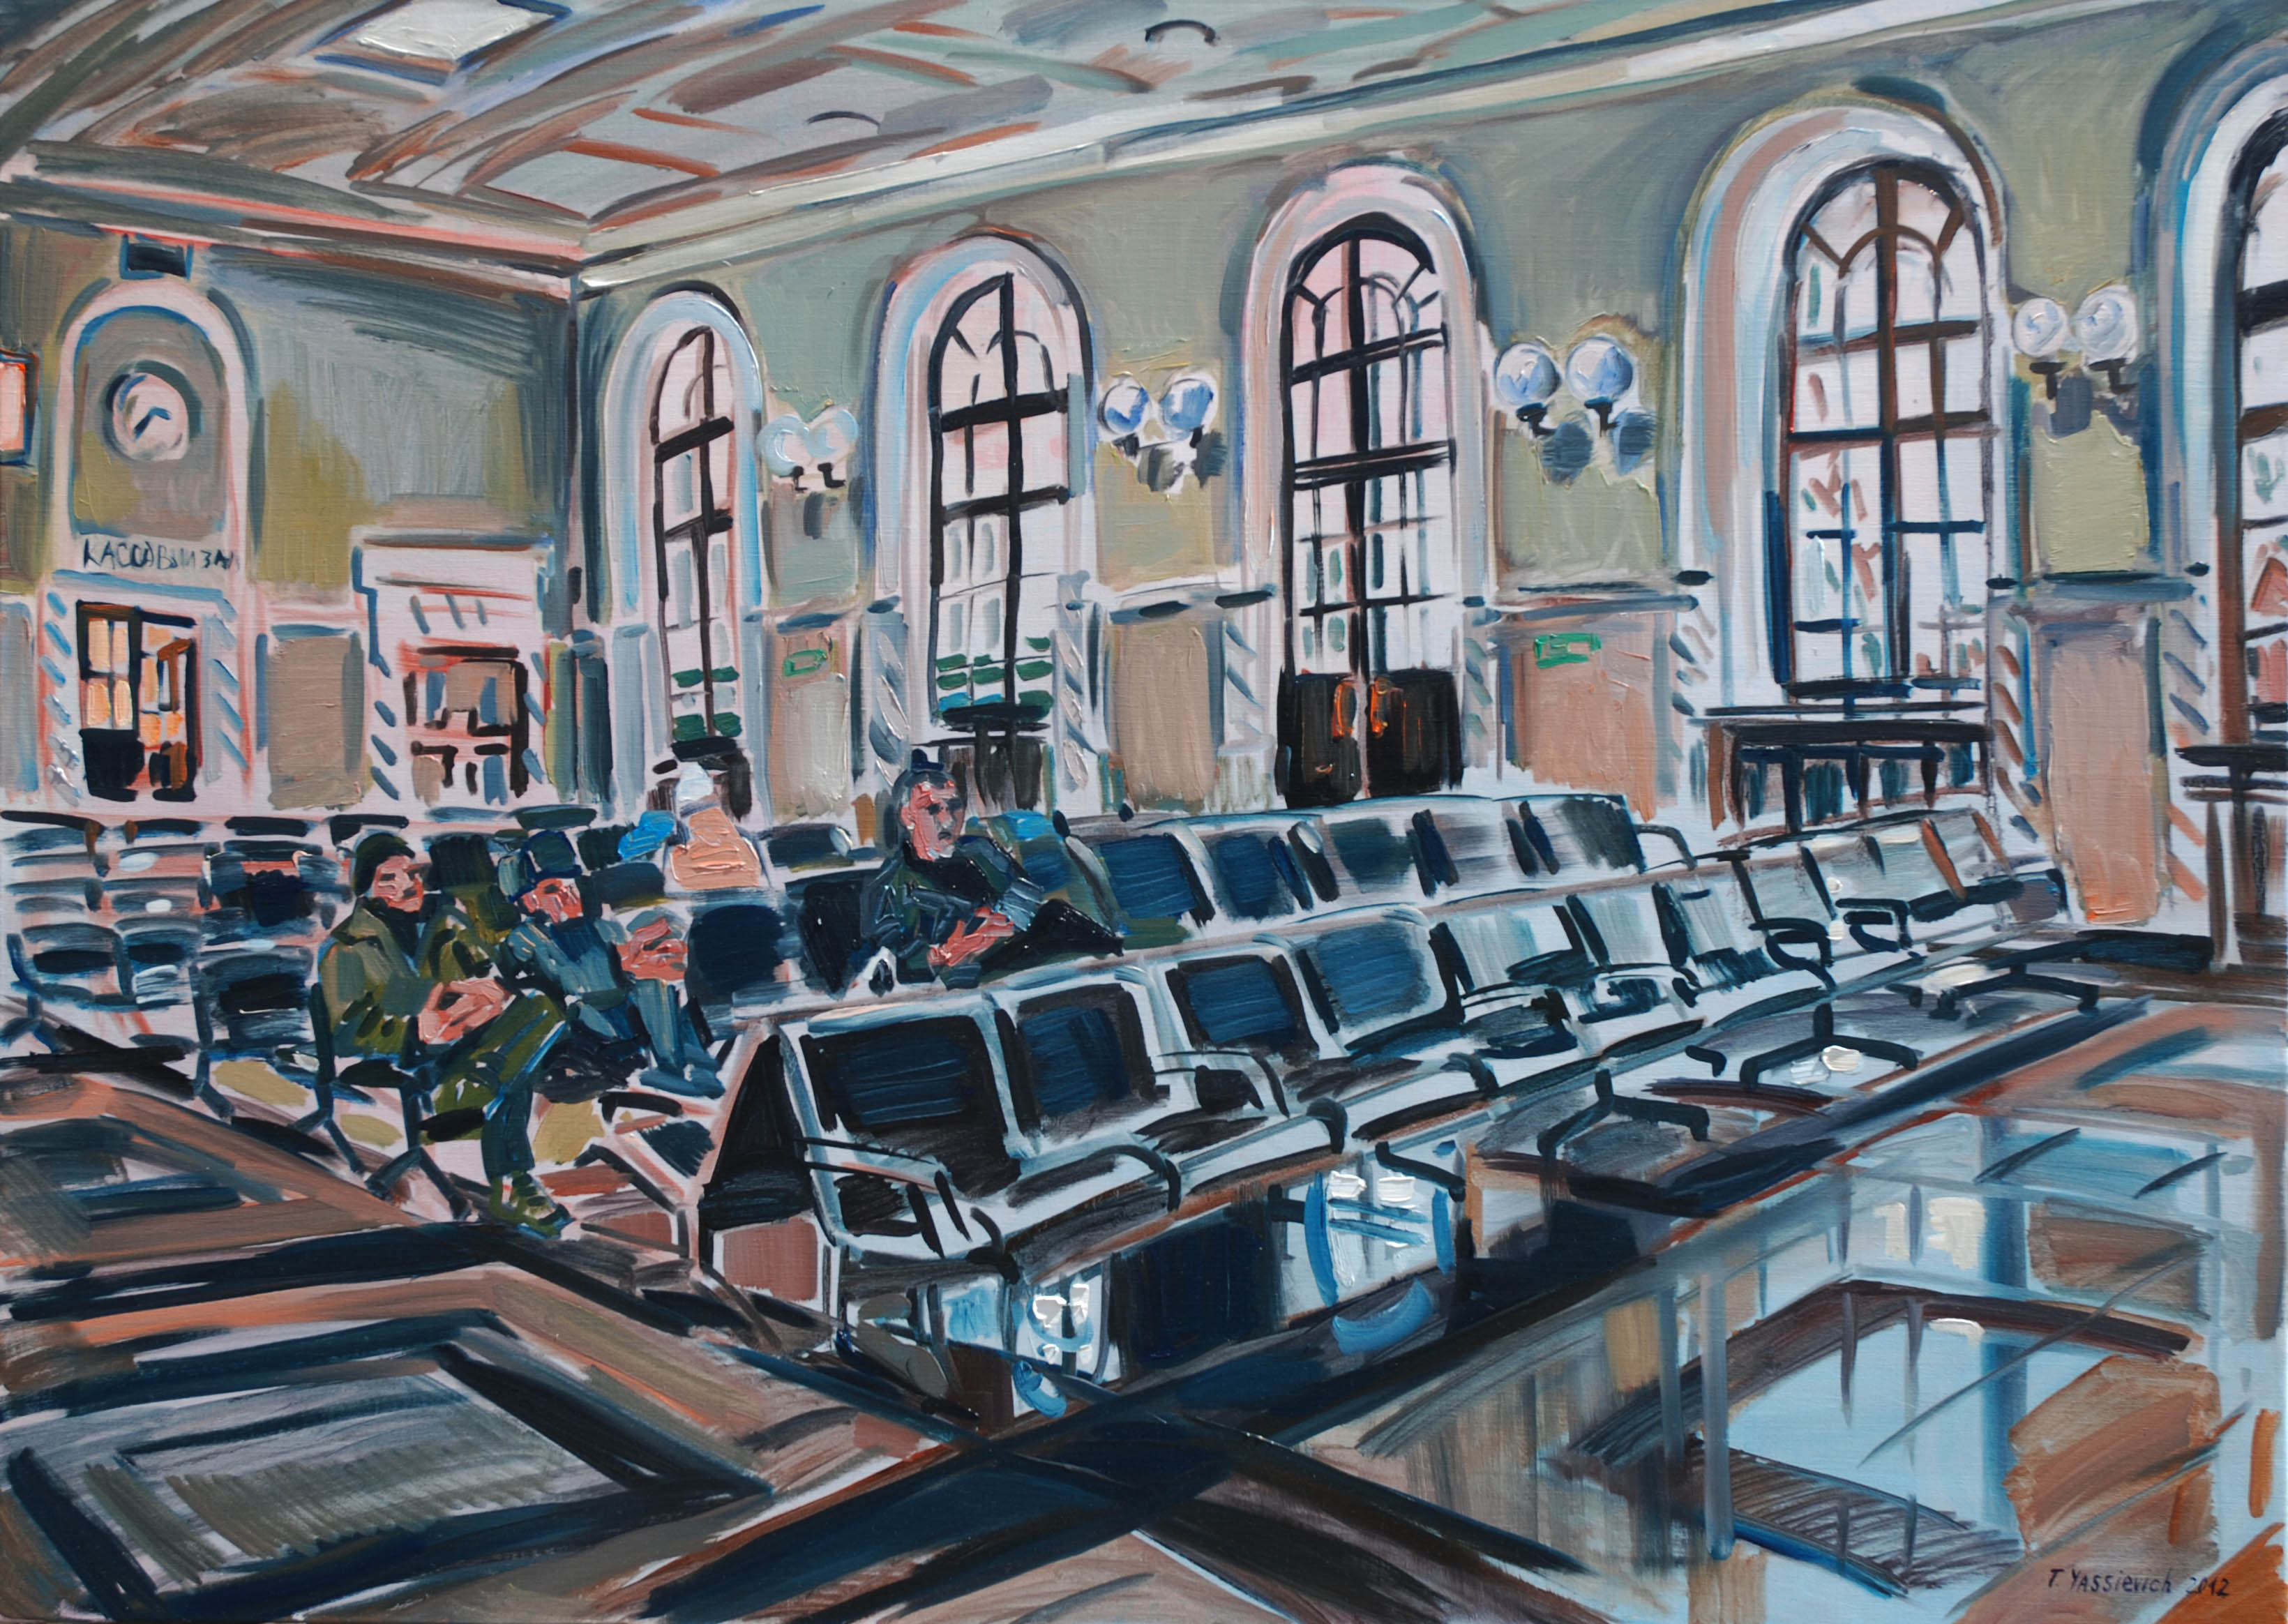 Illustration Expo. Knokke. Tatyana Yassievich. Pskov Station Waiting room. 115x160 cm 2012 huile sur toile. 2015-01-17